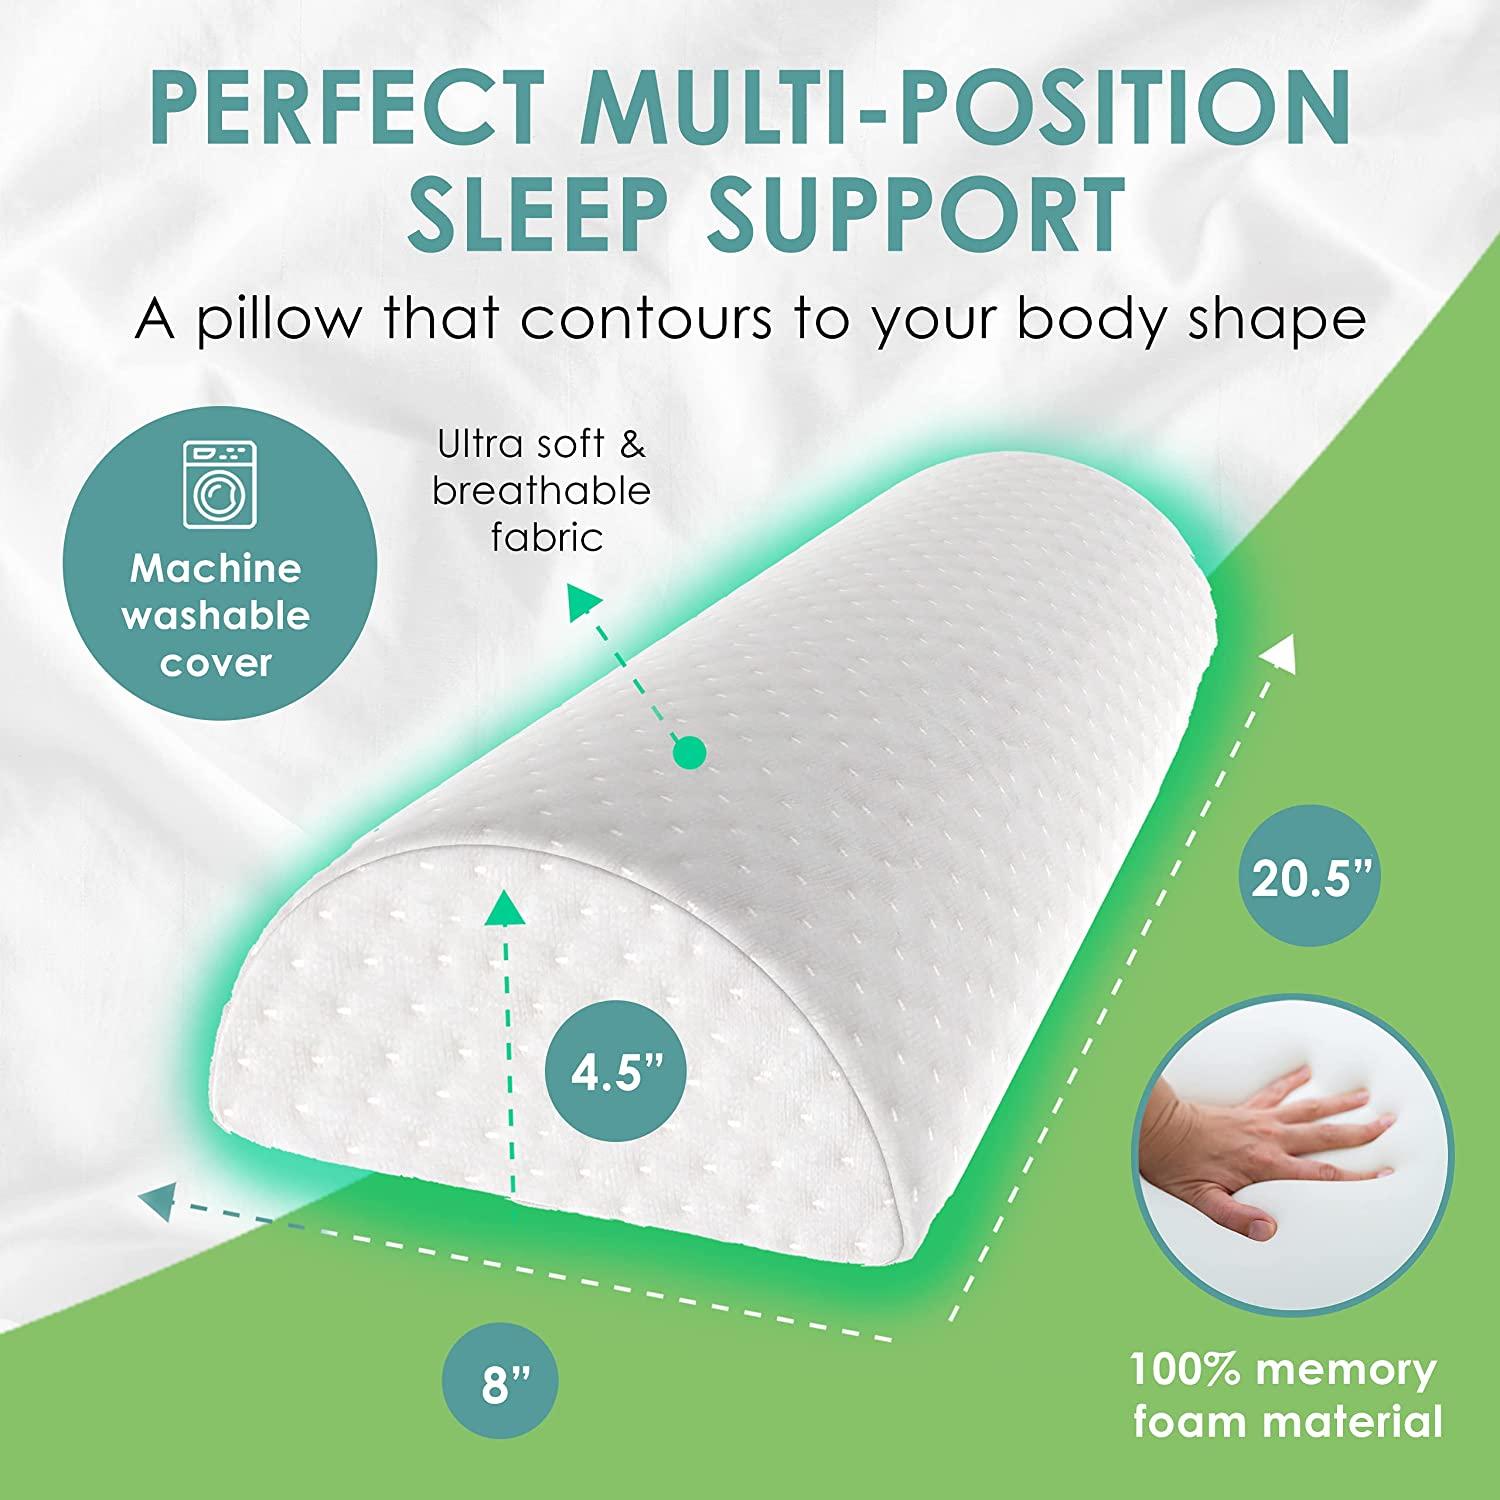 Contour Half Roll Bolster Pillow for Neck Support, Back Support Or Leg &  Knee Comfort